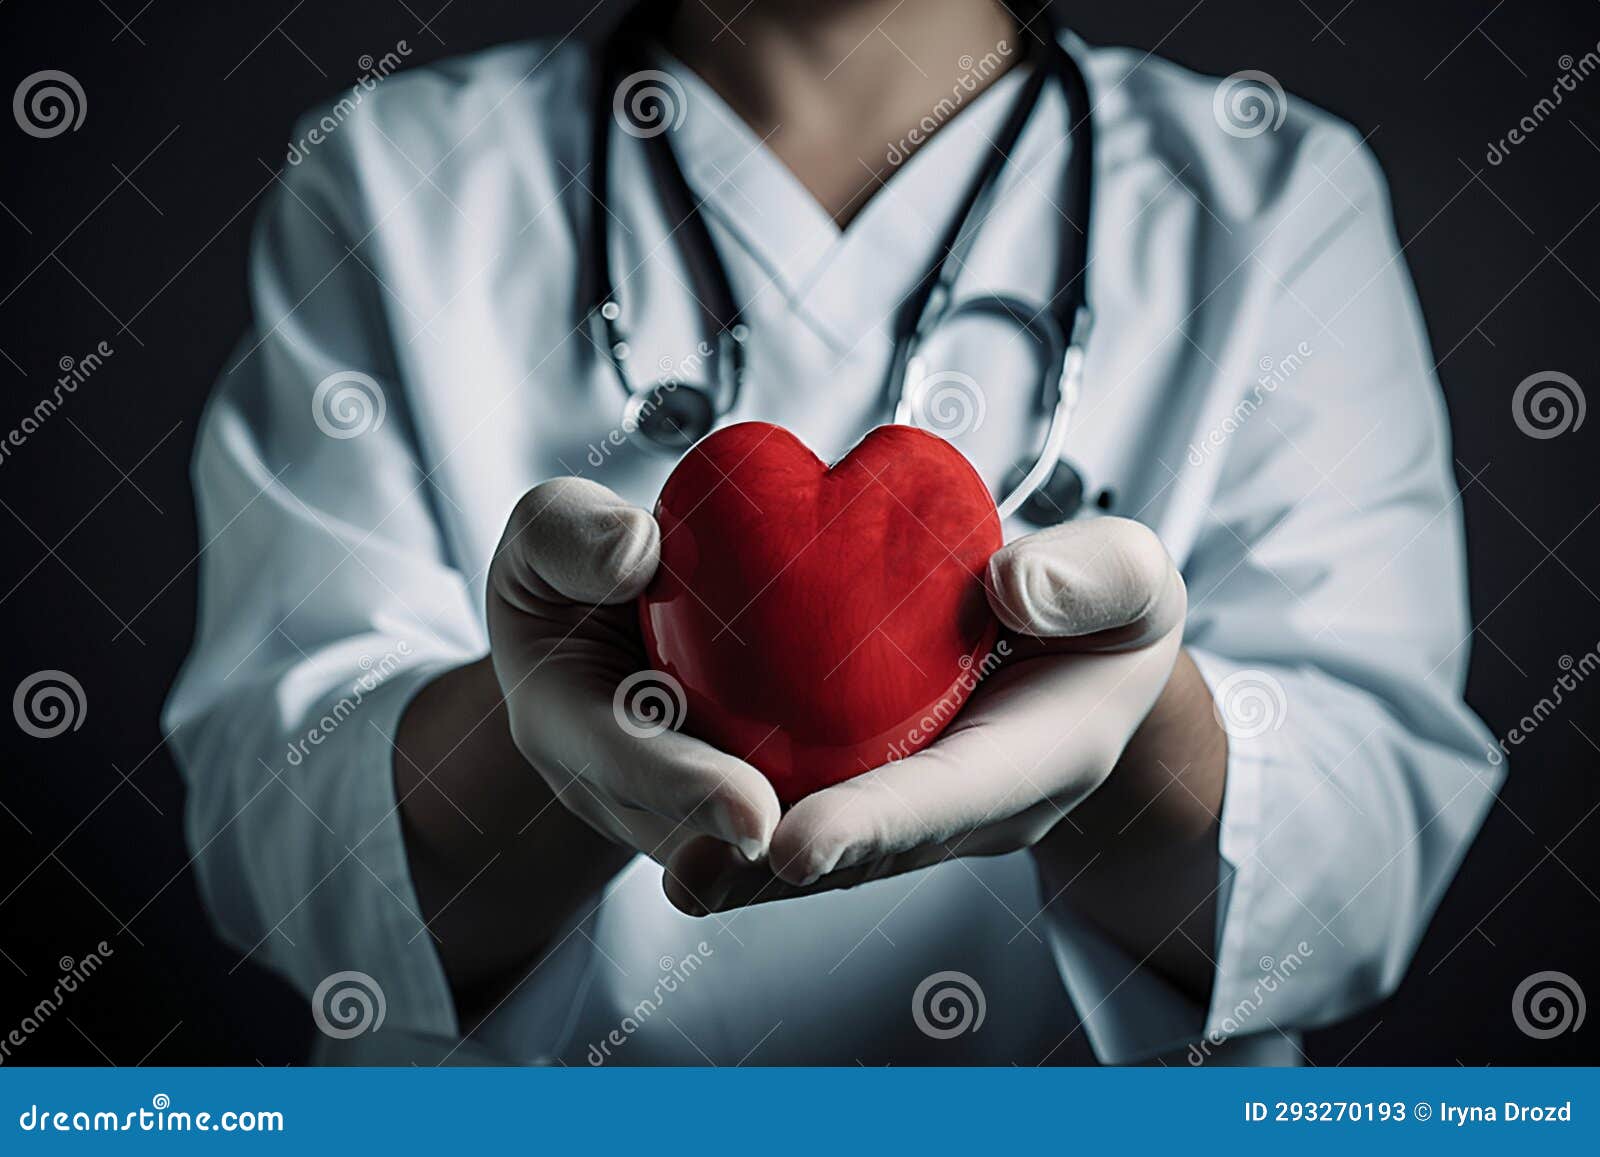 female doctor with stethoscope holding heart, medical concept